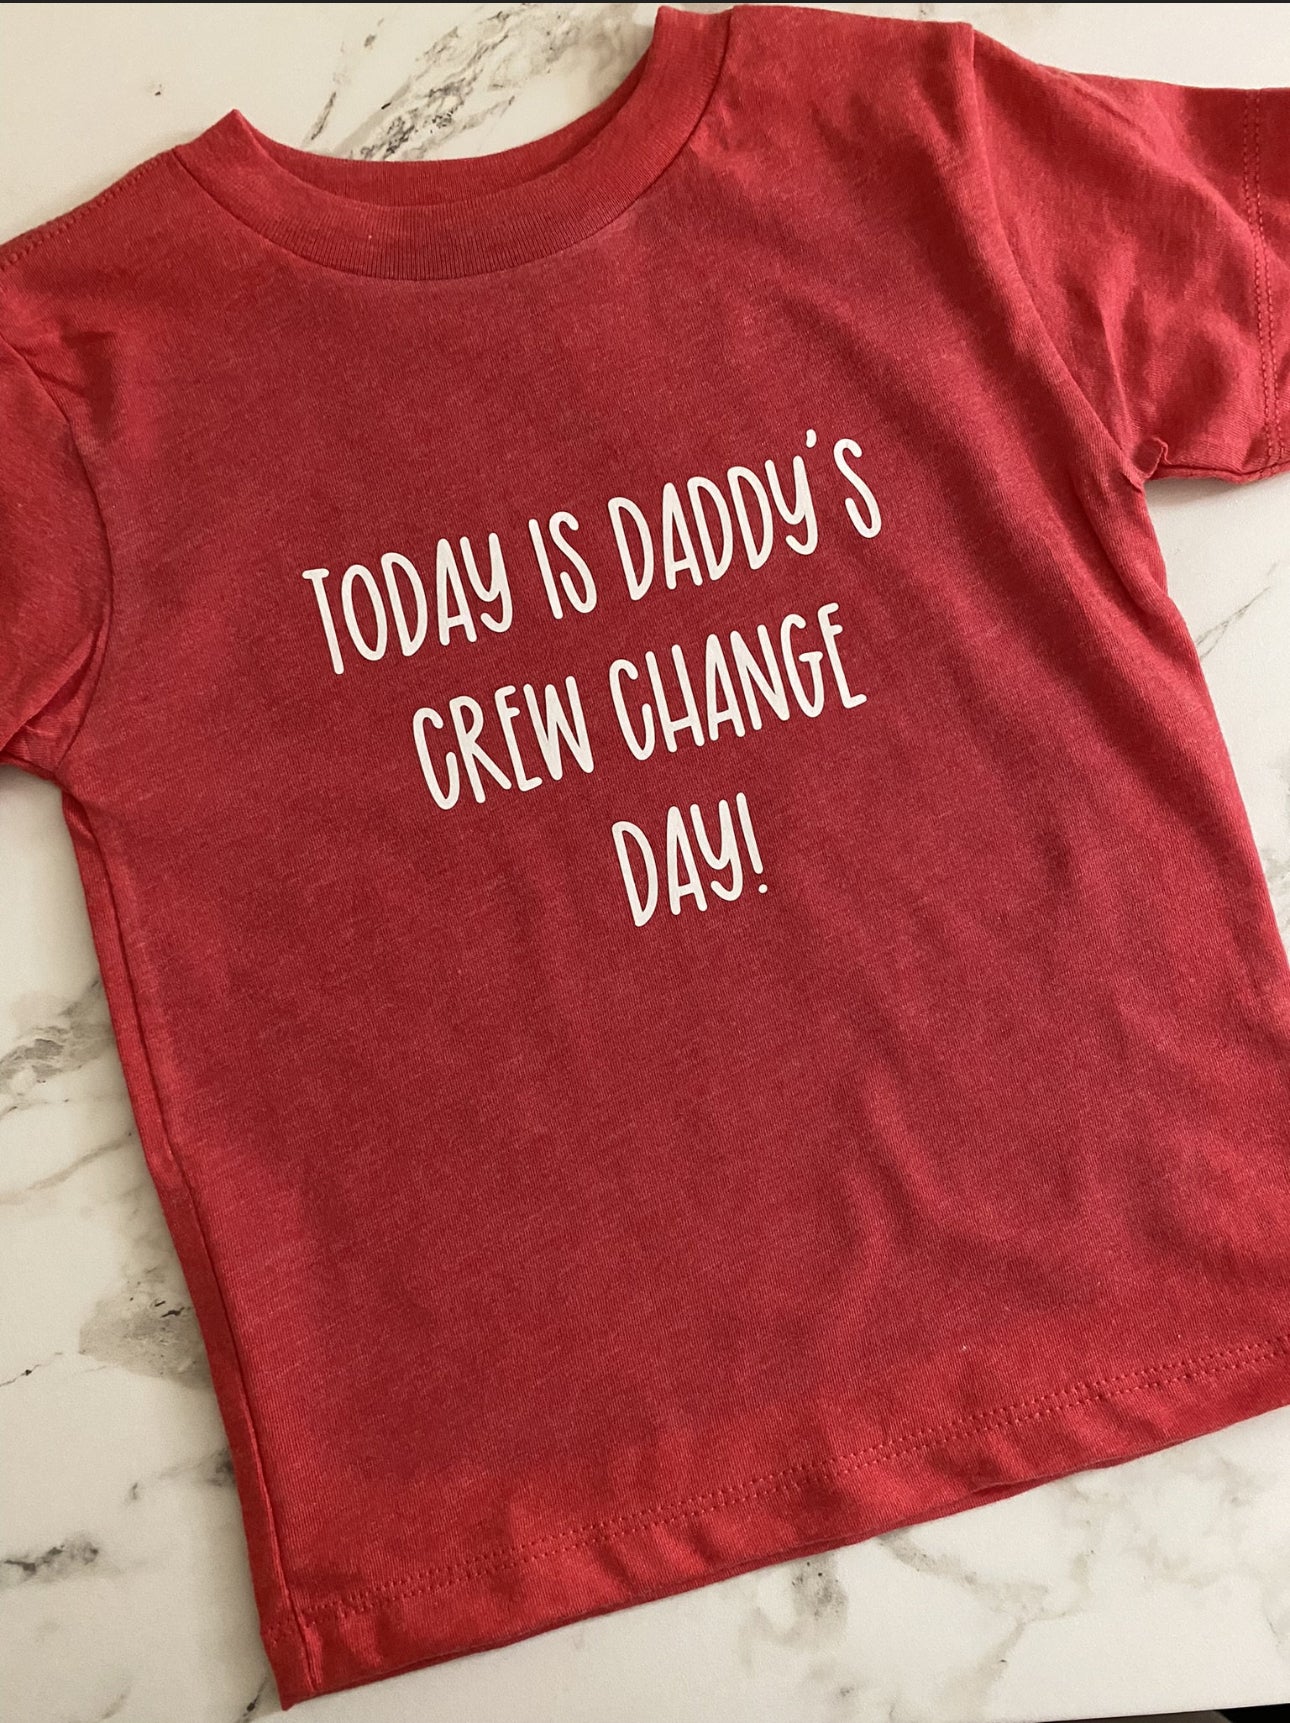 Daddy’s Crew Change Day